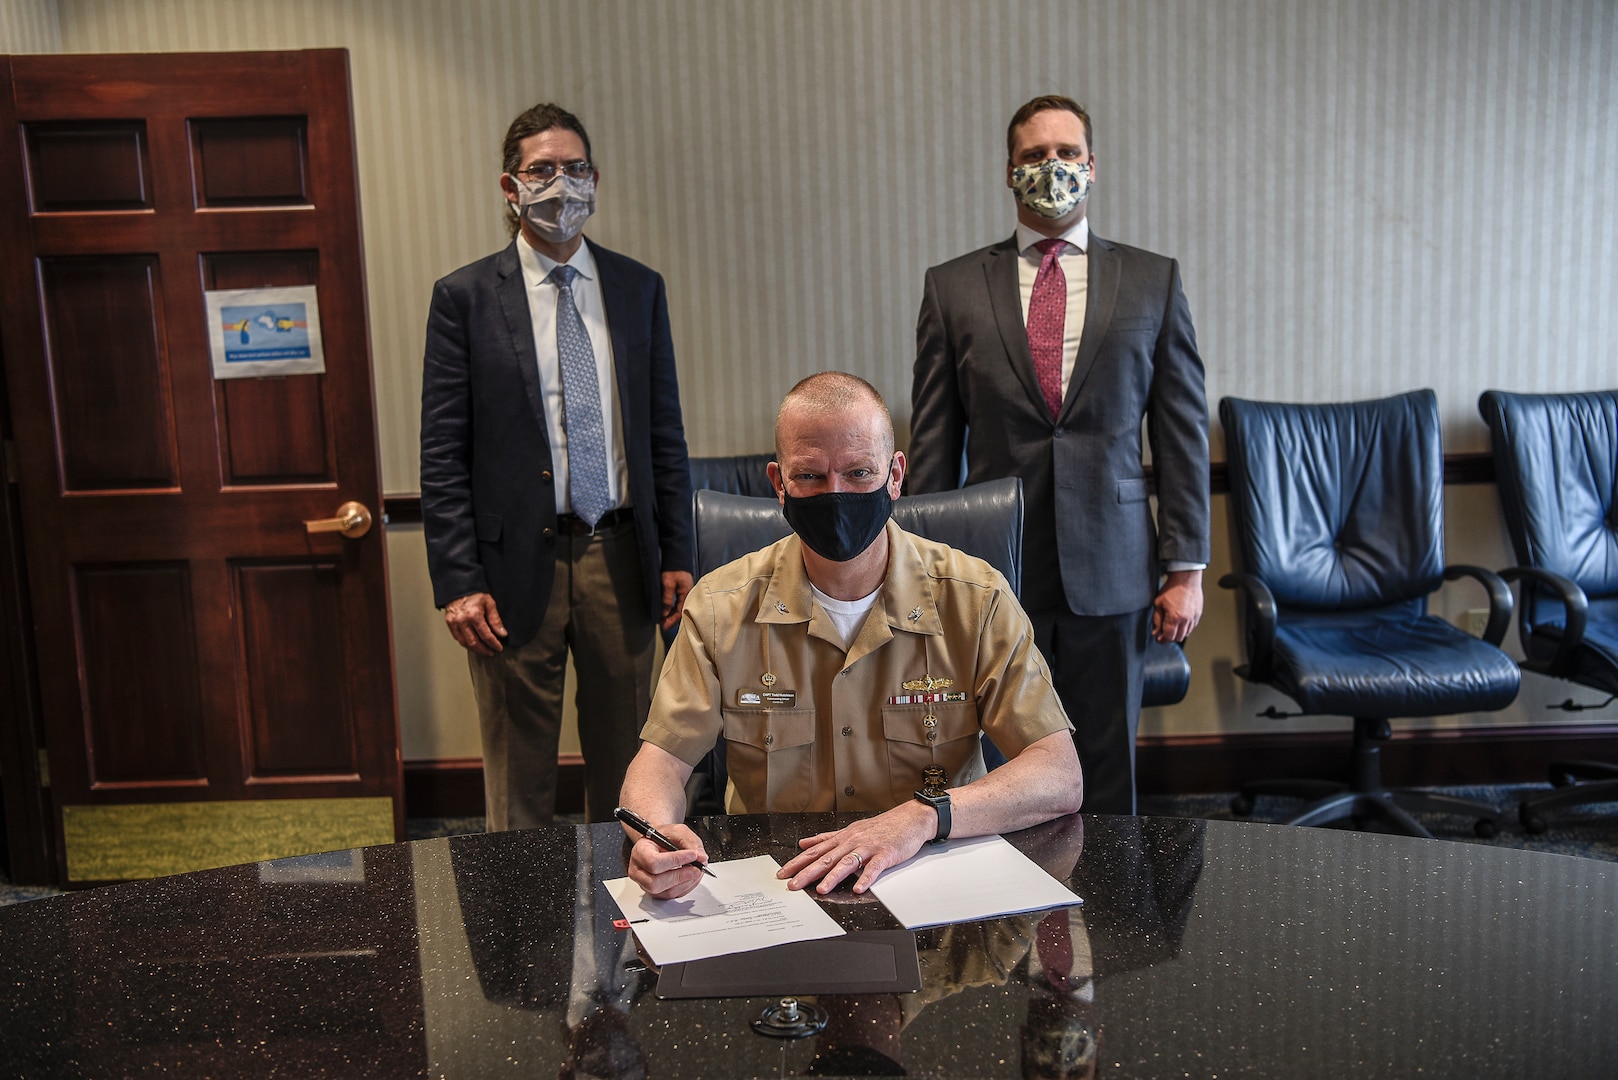 Capt. Todd Hutchison signs a Cooperative Research and Development Agreement (CRADA) between Naval Surface Warfare Center, Carderock Division (NSWCCD) and Thermal Compaction Group (TCG) on April 29, 2021.